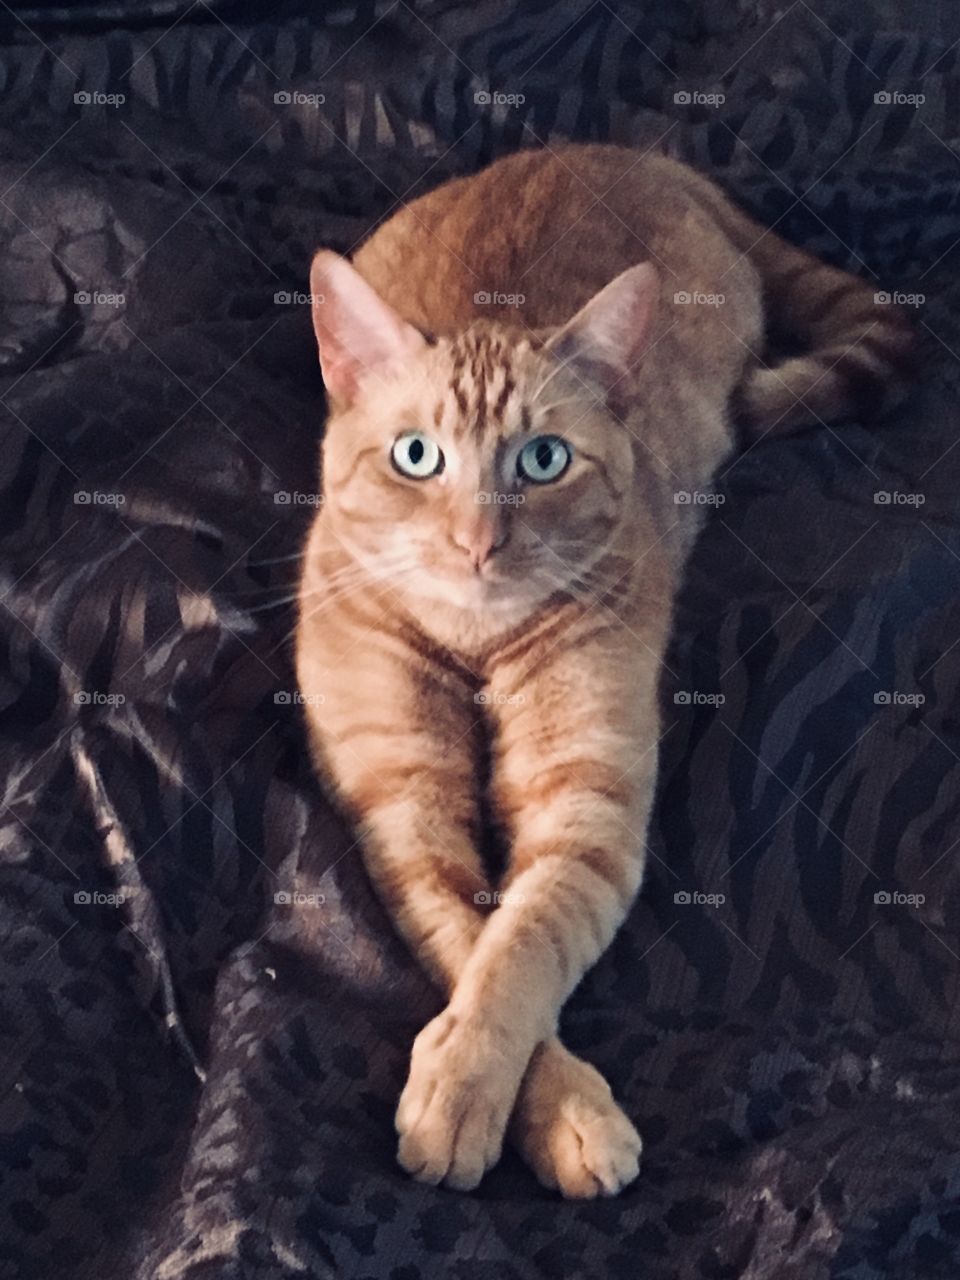 Ginger cat doing yoga on a bed in Florida purrrrrrfectly 😻